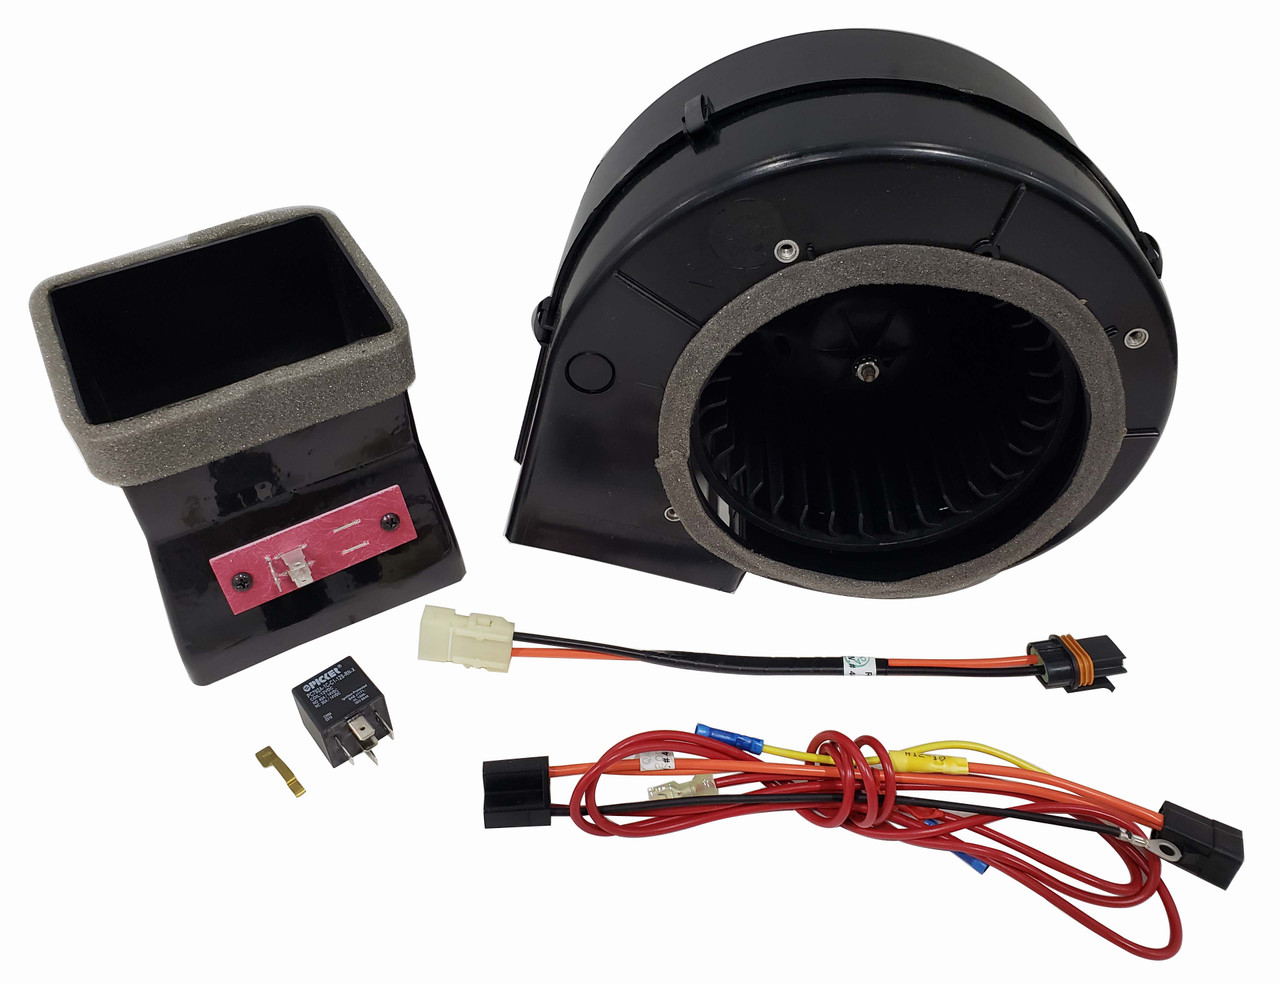 Blower Assembly With Case And Harness Kit. Replacement For No. 81600776